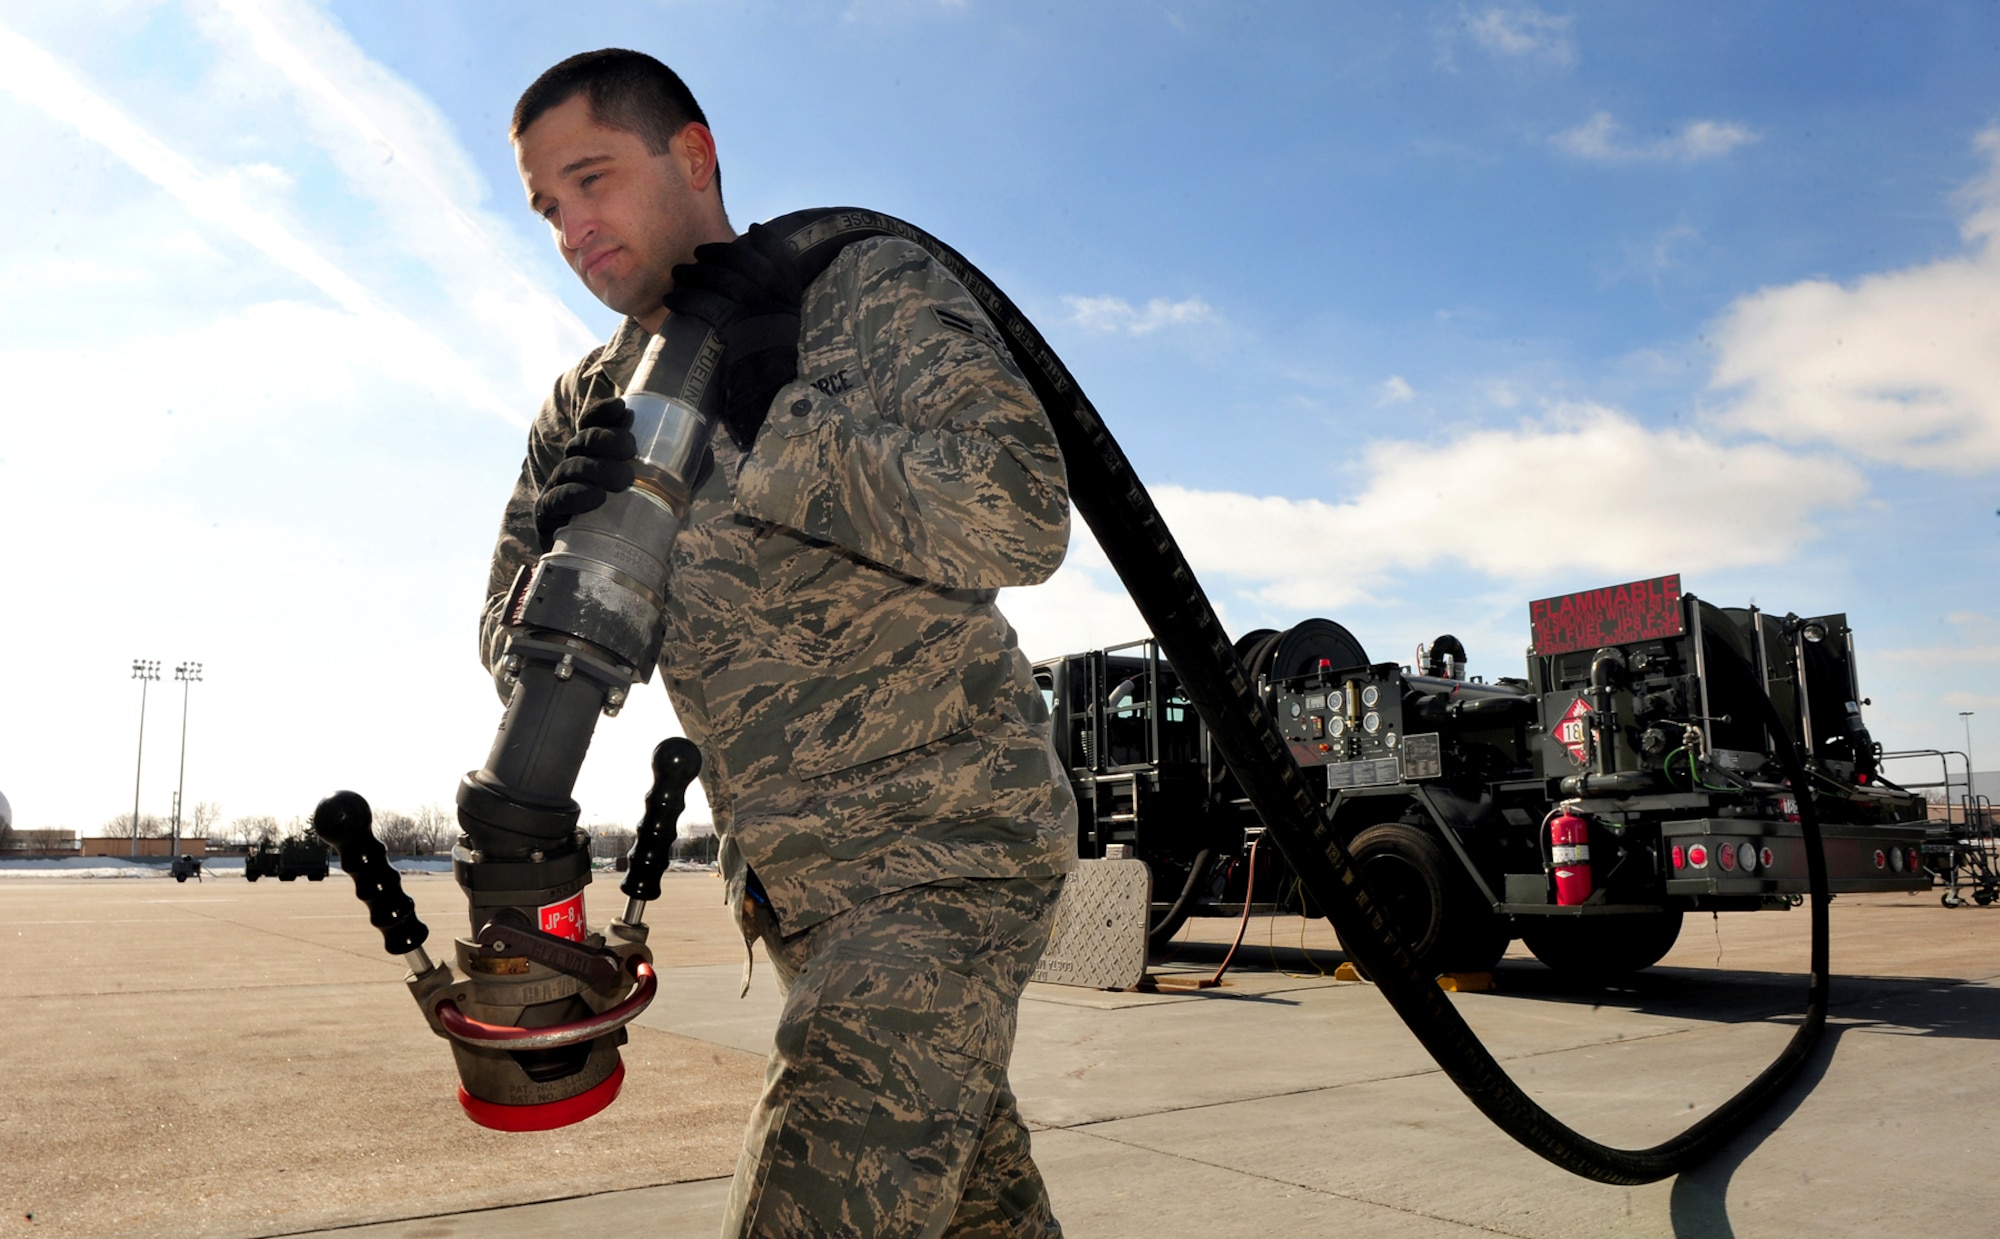 OFFUTT AIR FORCE BASE, Neb. - Airman 1st Class Ricky Vickers, a fuels distribution operator with the 55th Maintenance Squadron's Fuels Management Flight, prepares to refuel a 55th Wing Constant Phoenix aircraft here using the underground fuel delivery system and an R-12 hydrant truck March 1. The R-12 is capable of pushing up to 1,000 gallons of jet fuel per minute. U.S. Air Force photo by Josh Plueger
